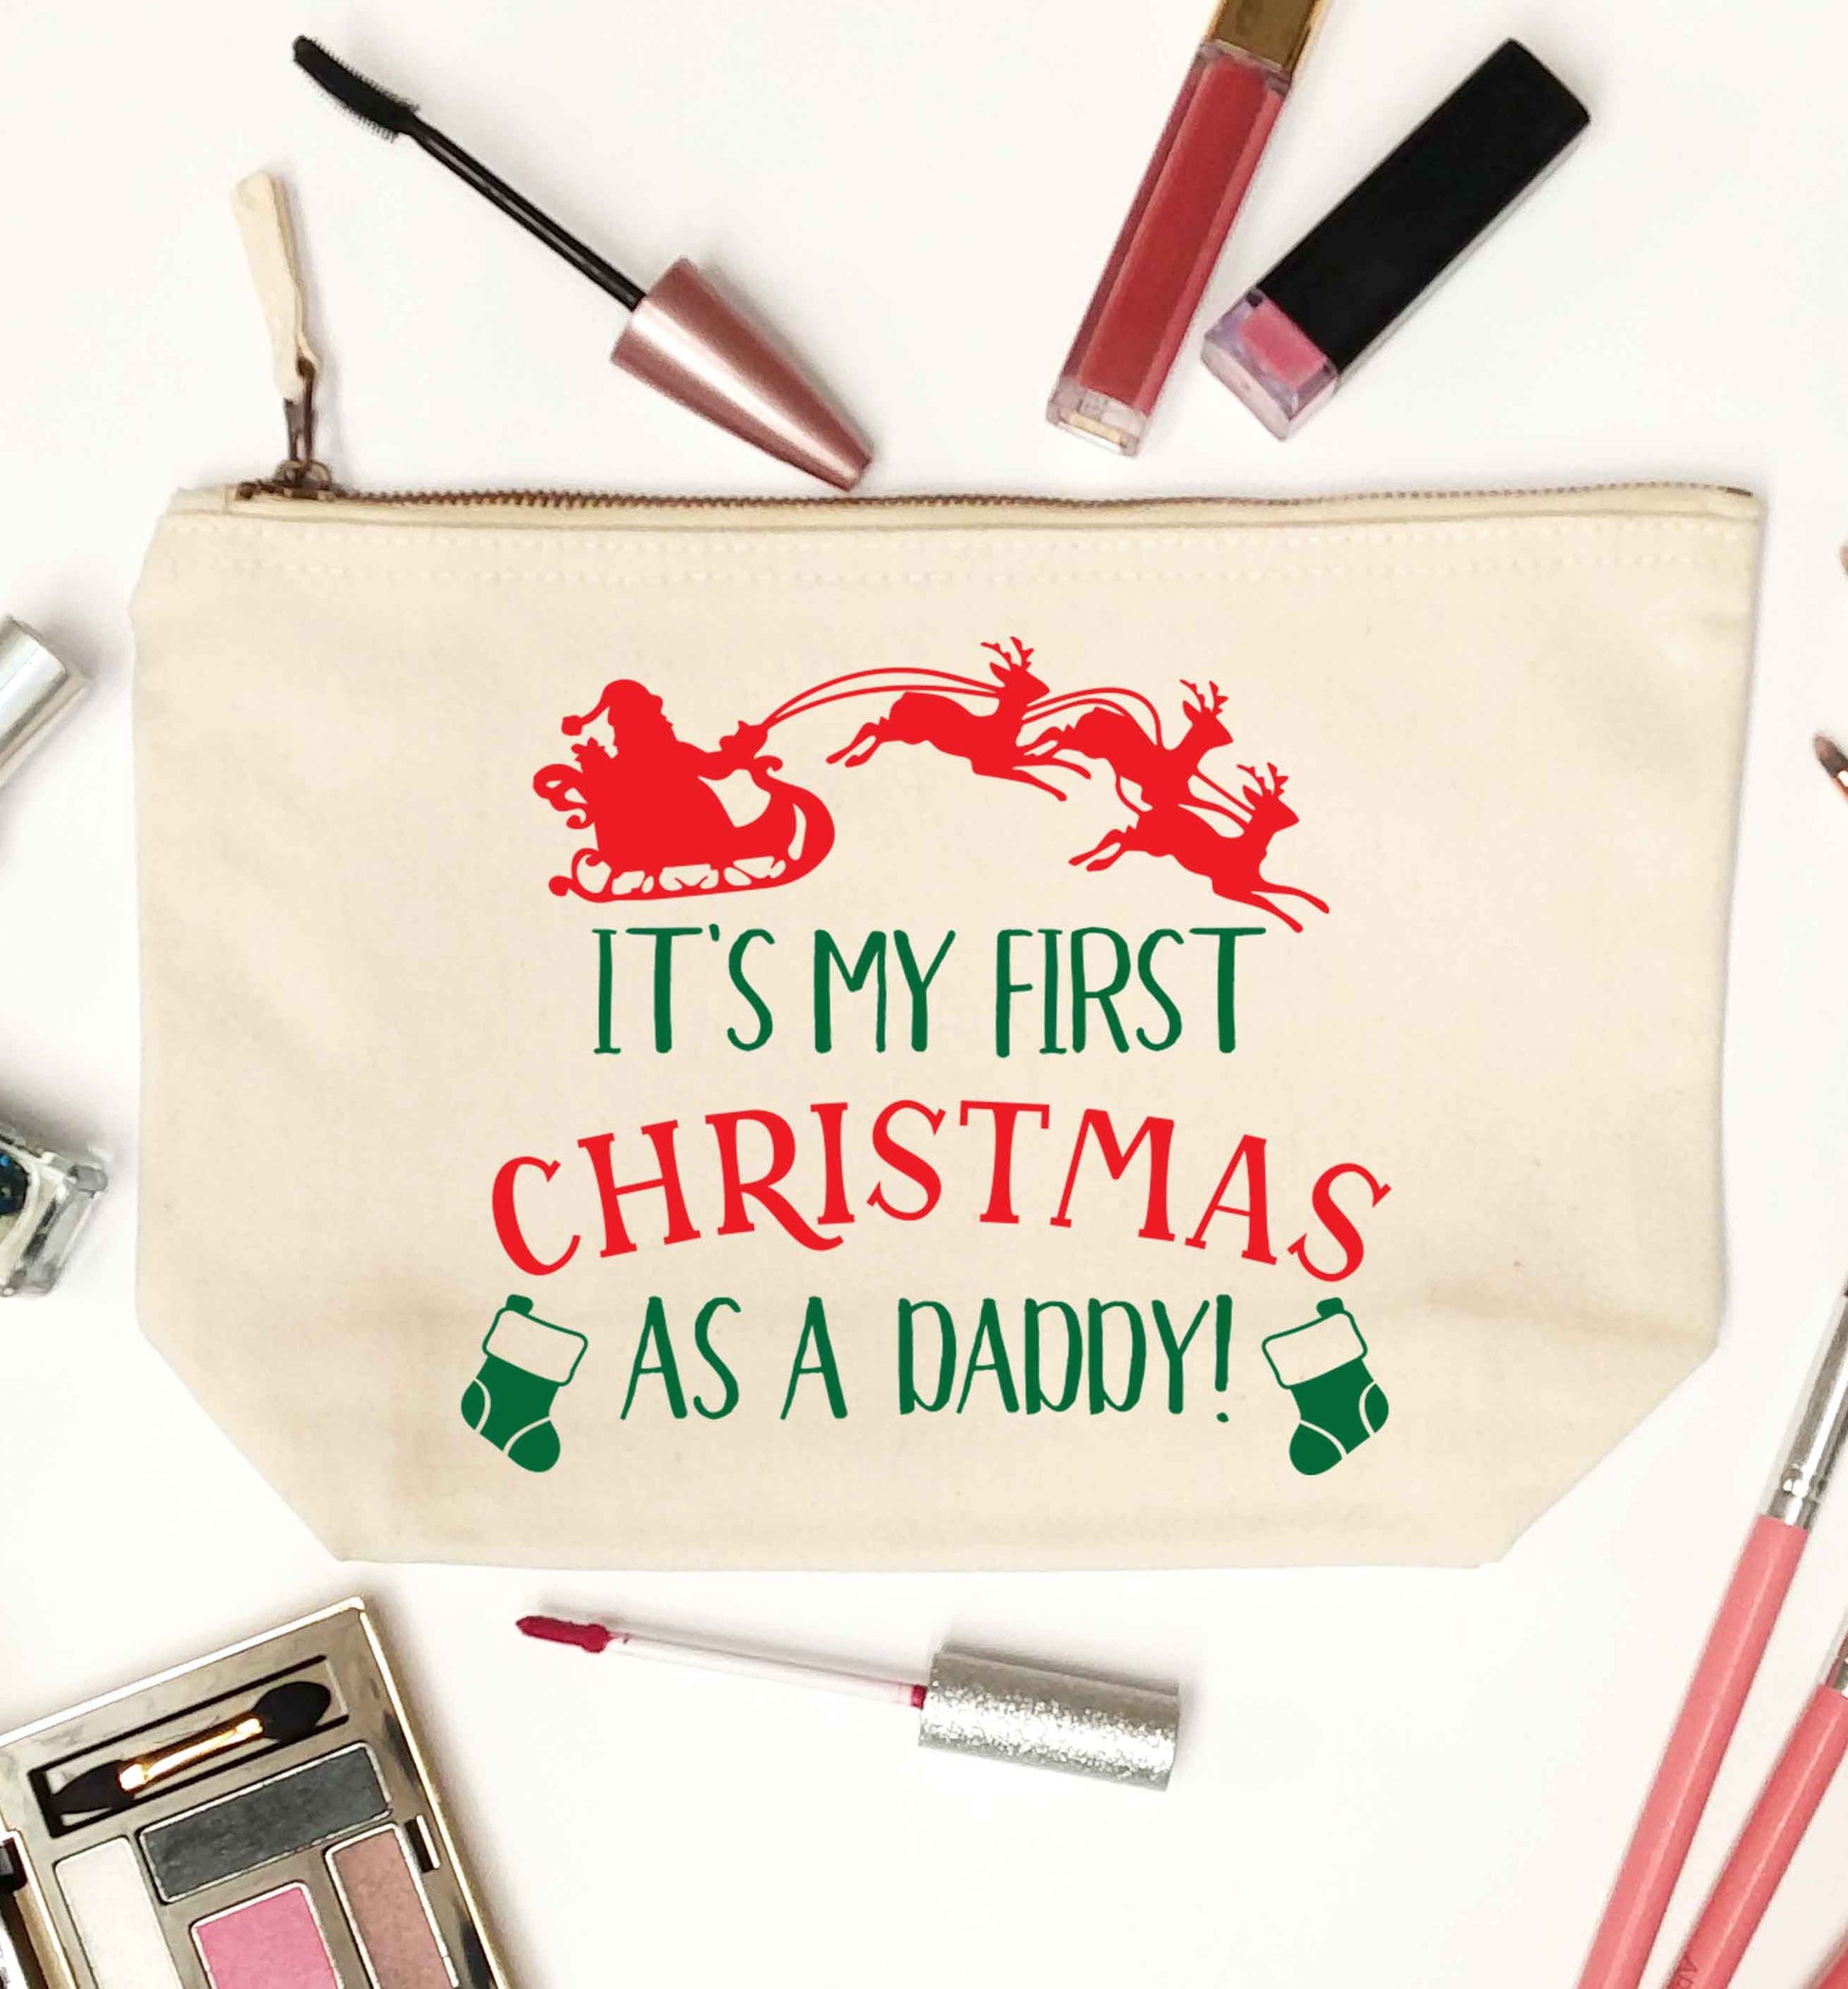 It's my first Christmas as a daddy natural makeup bag